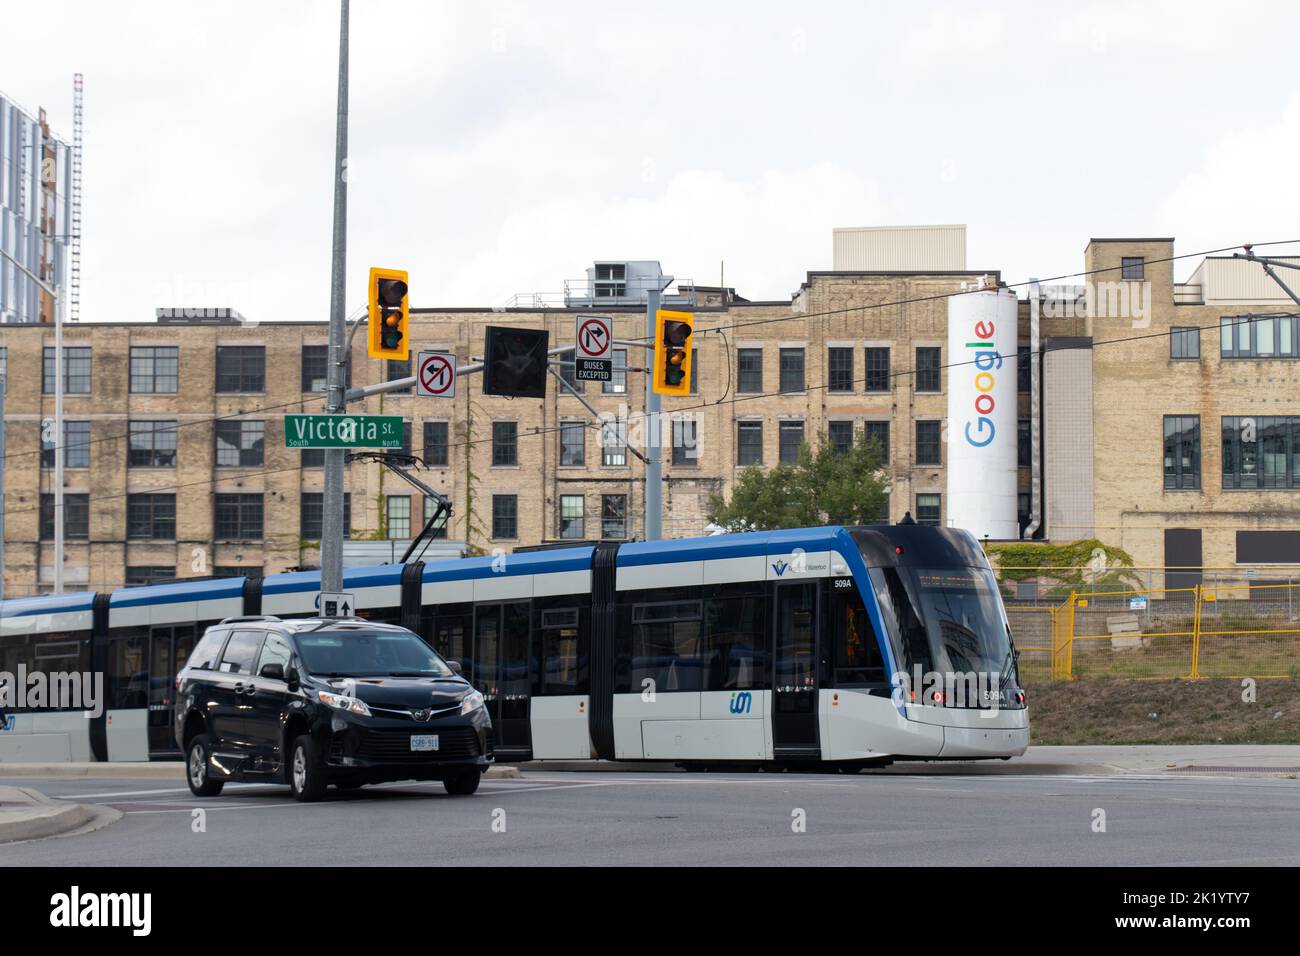 A Waterloo Region, Grand River Transit Alstom, formally Bombardier streetcar is seen in downtown Kitchener passing by a Google office in background. Stock Photo